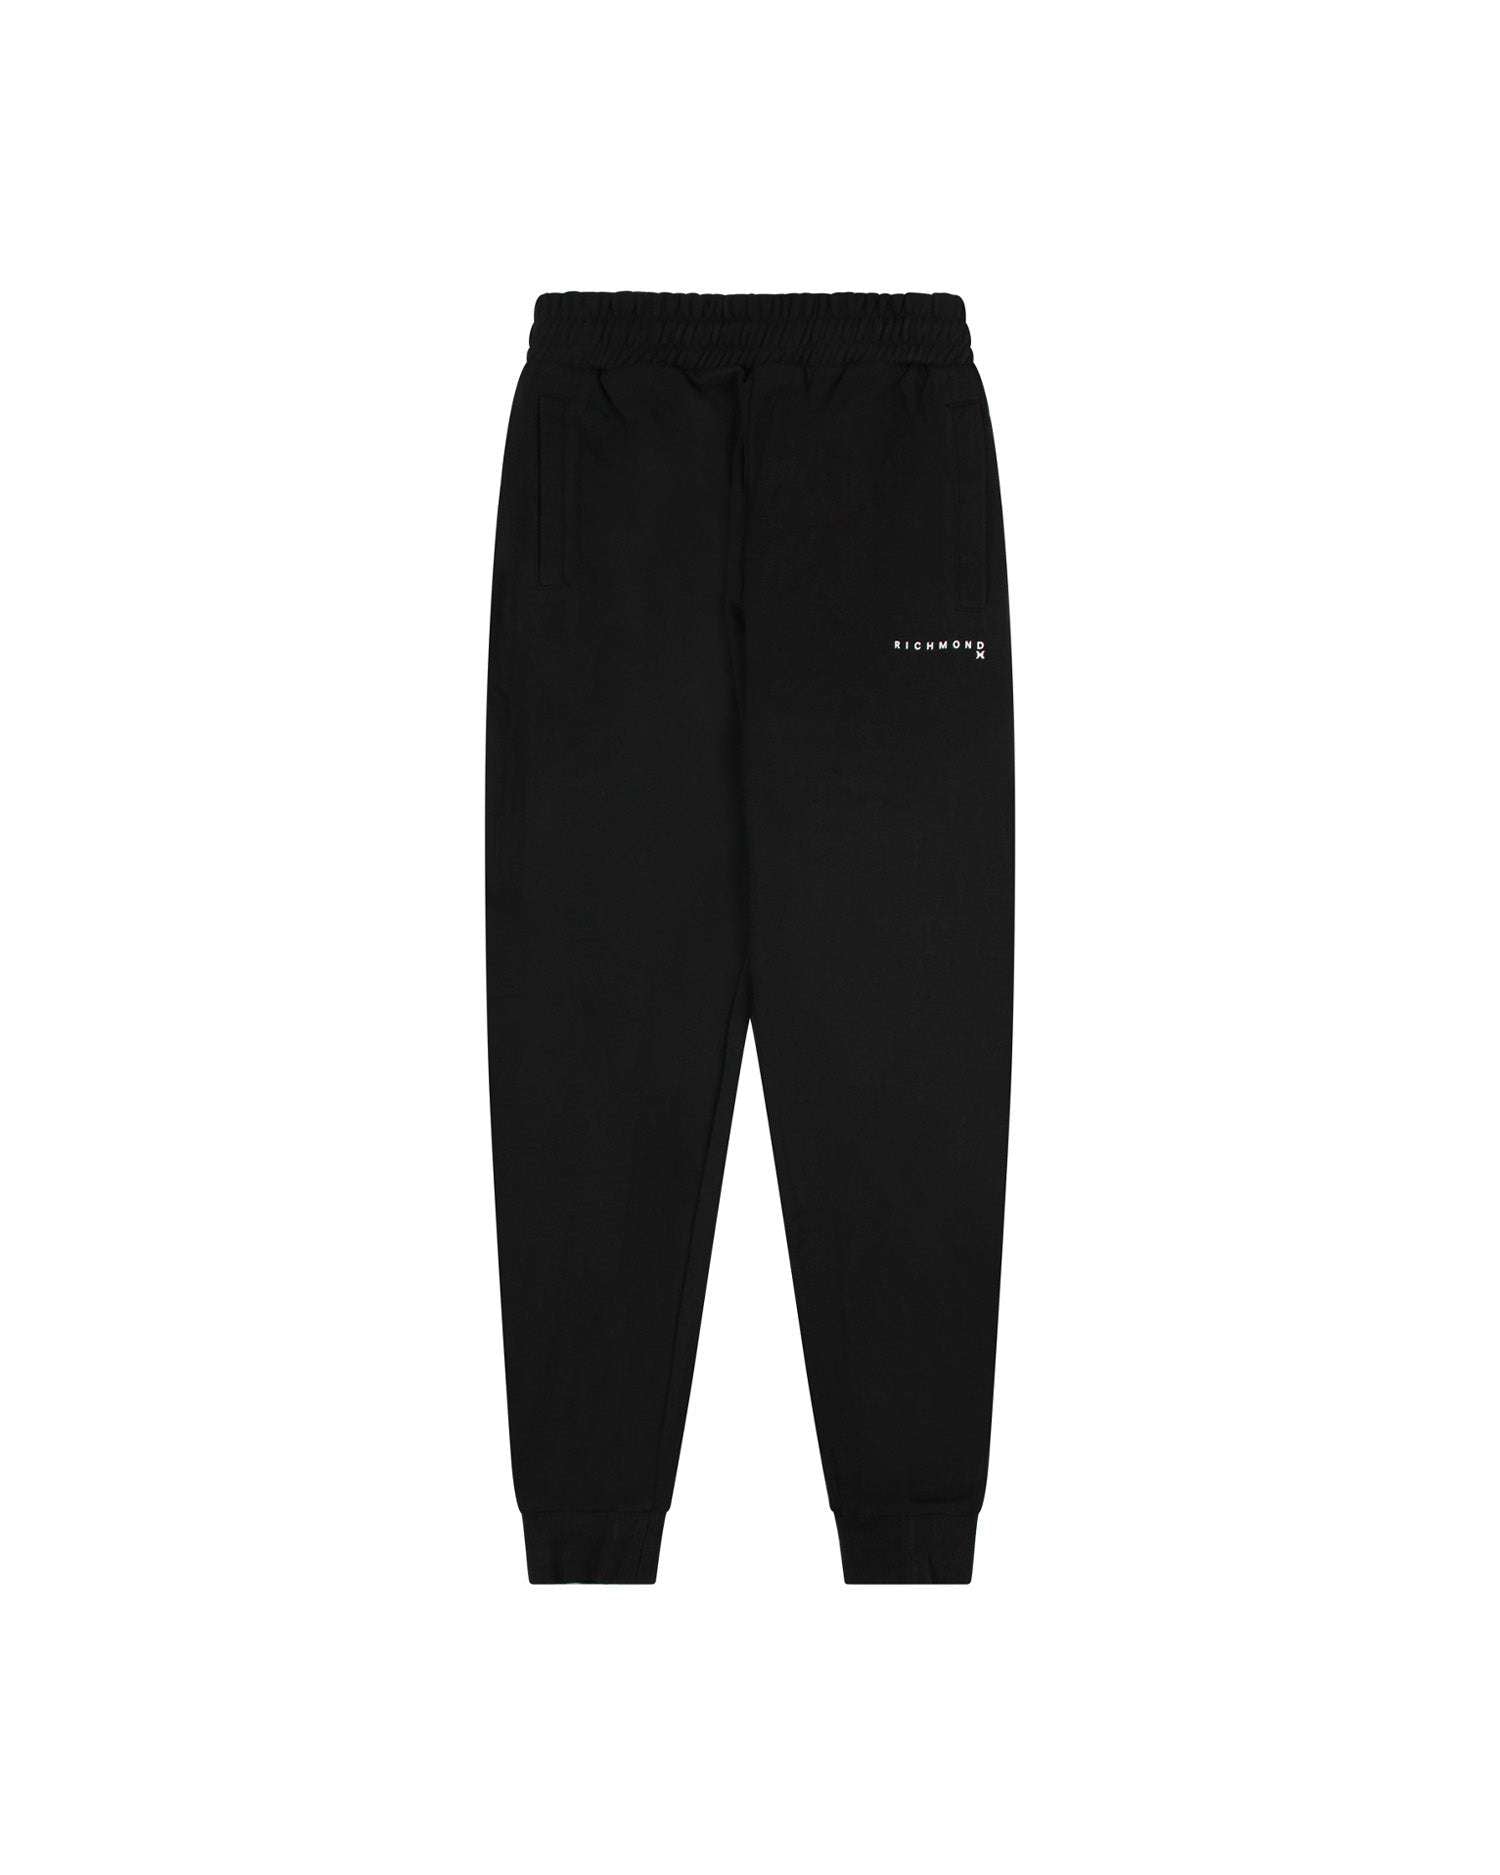 Jogging pants with logo on the front – John Richmond